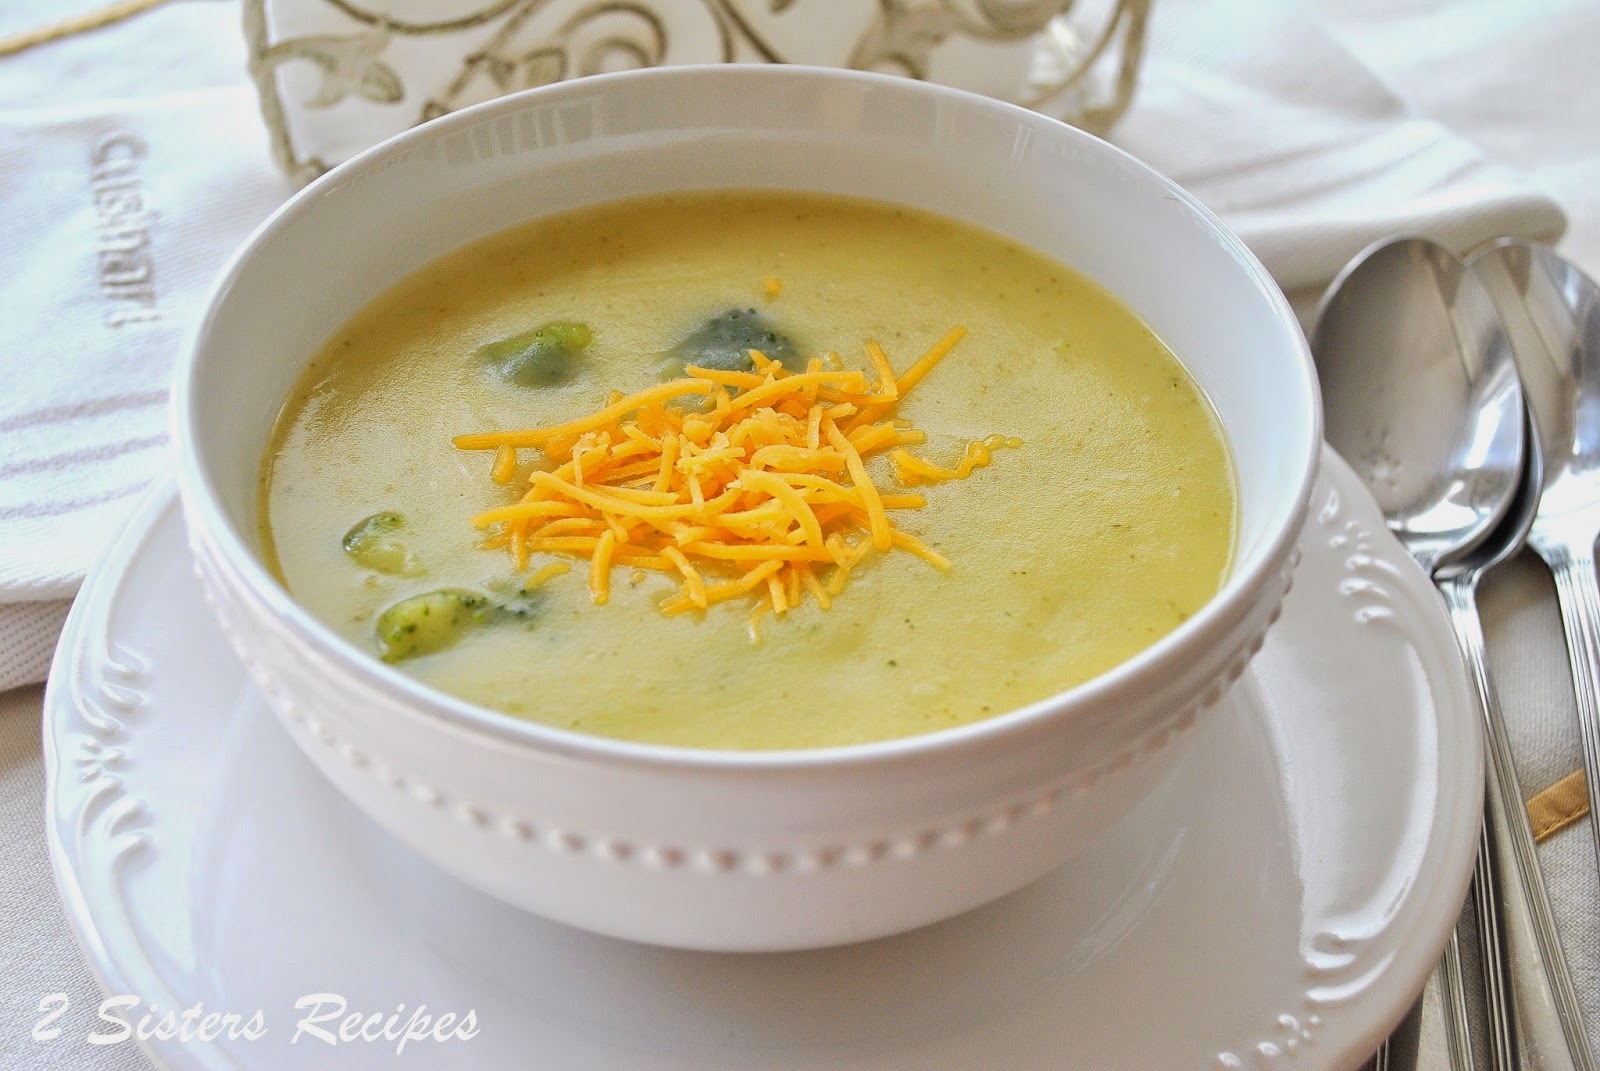 A bowl of soup with some shredded cheddar cheese on top. by 2sistersrecipes.com